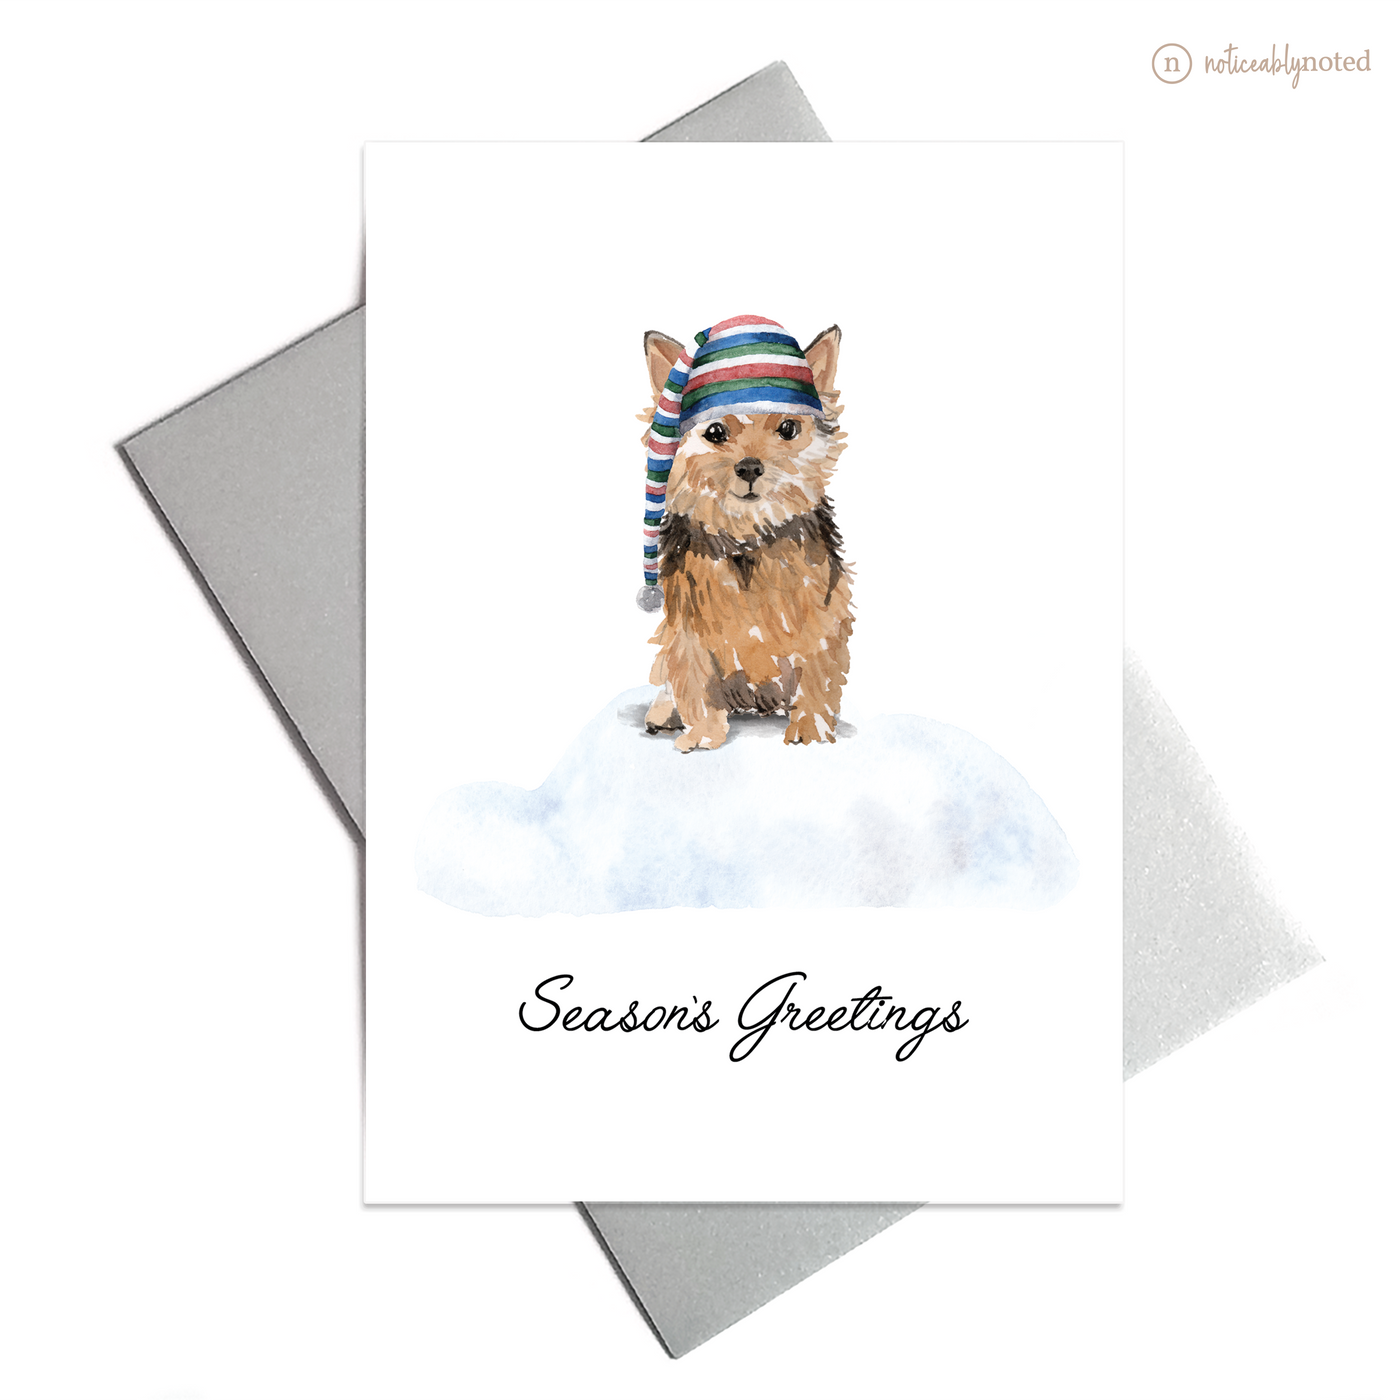 Norfolk Terrier Dog Christmas Card | Noticeably Noted